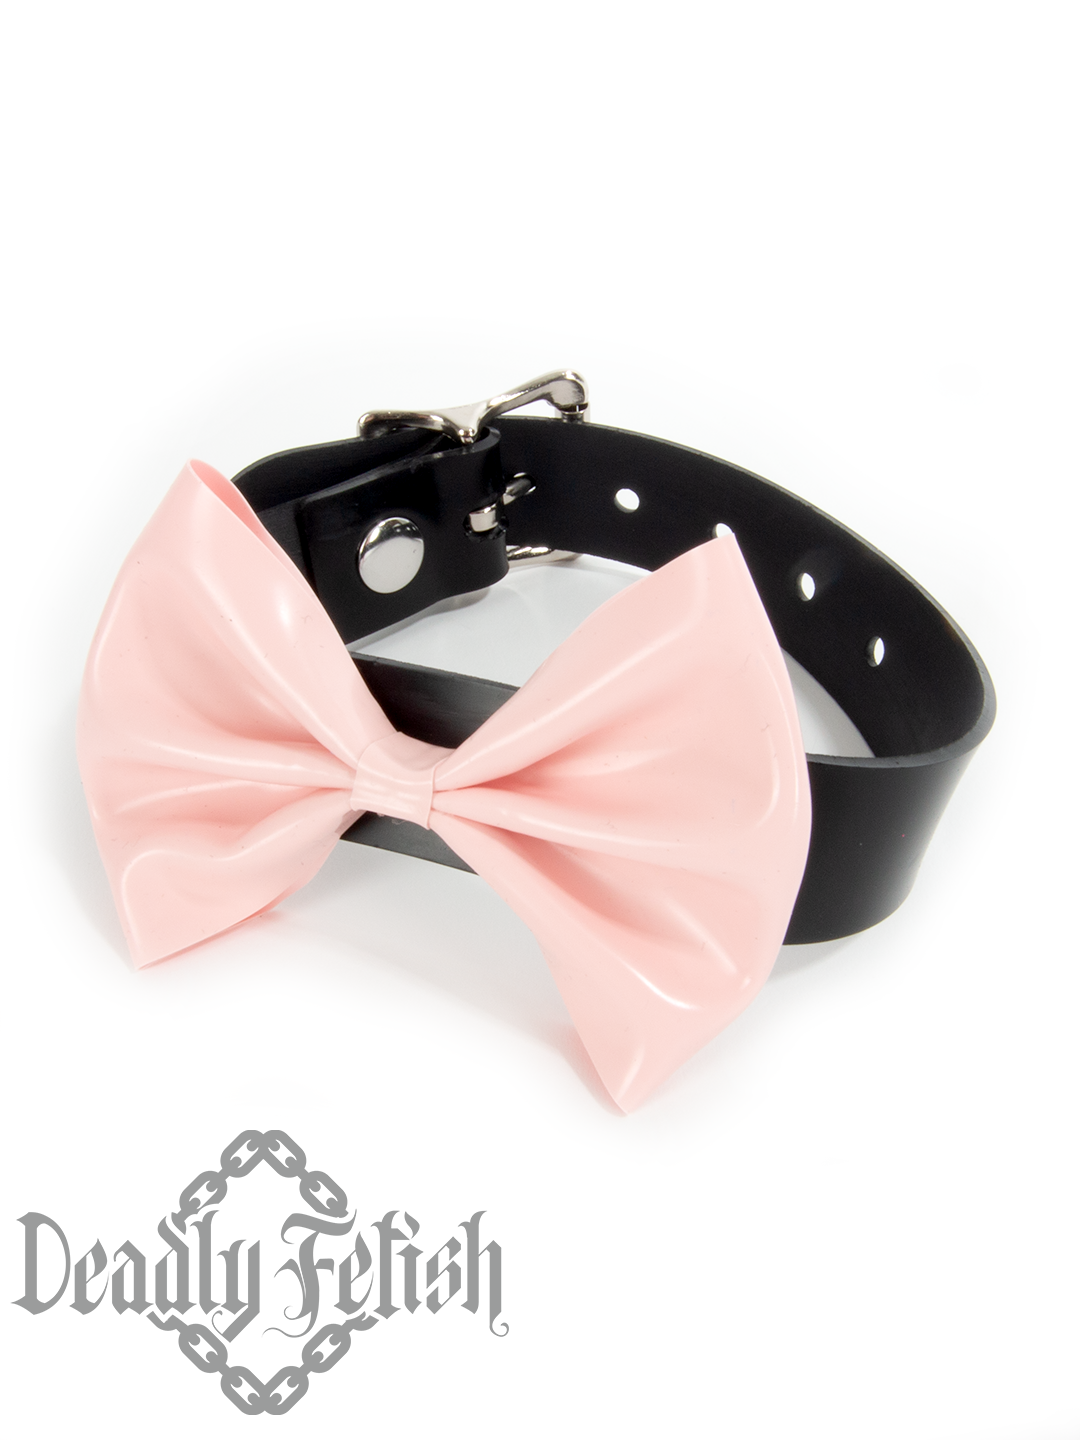 Deadly Fetish Made-to-Order Latex: Basic Bow Choker